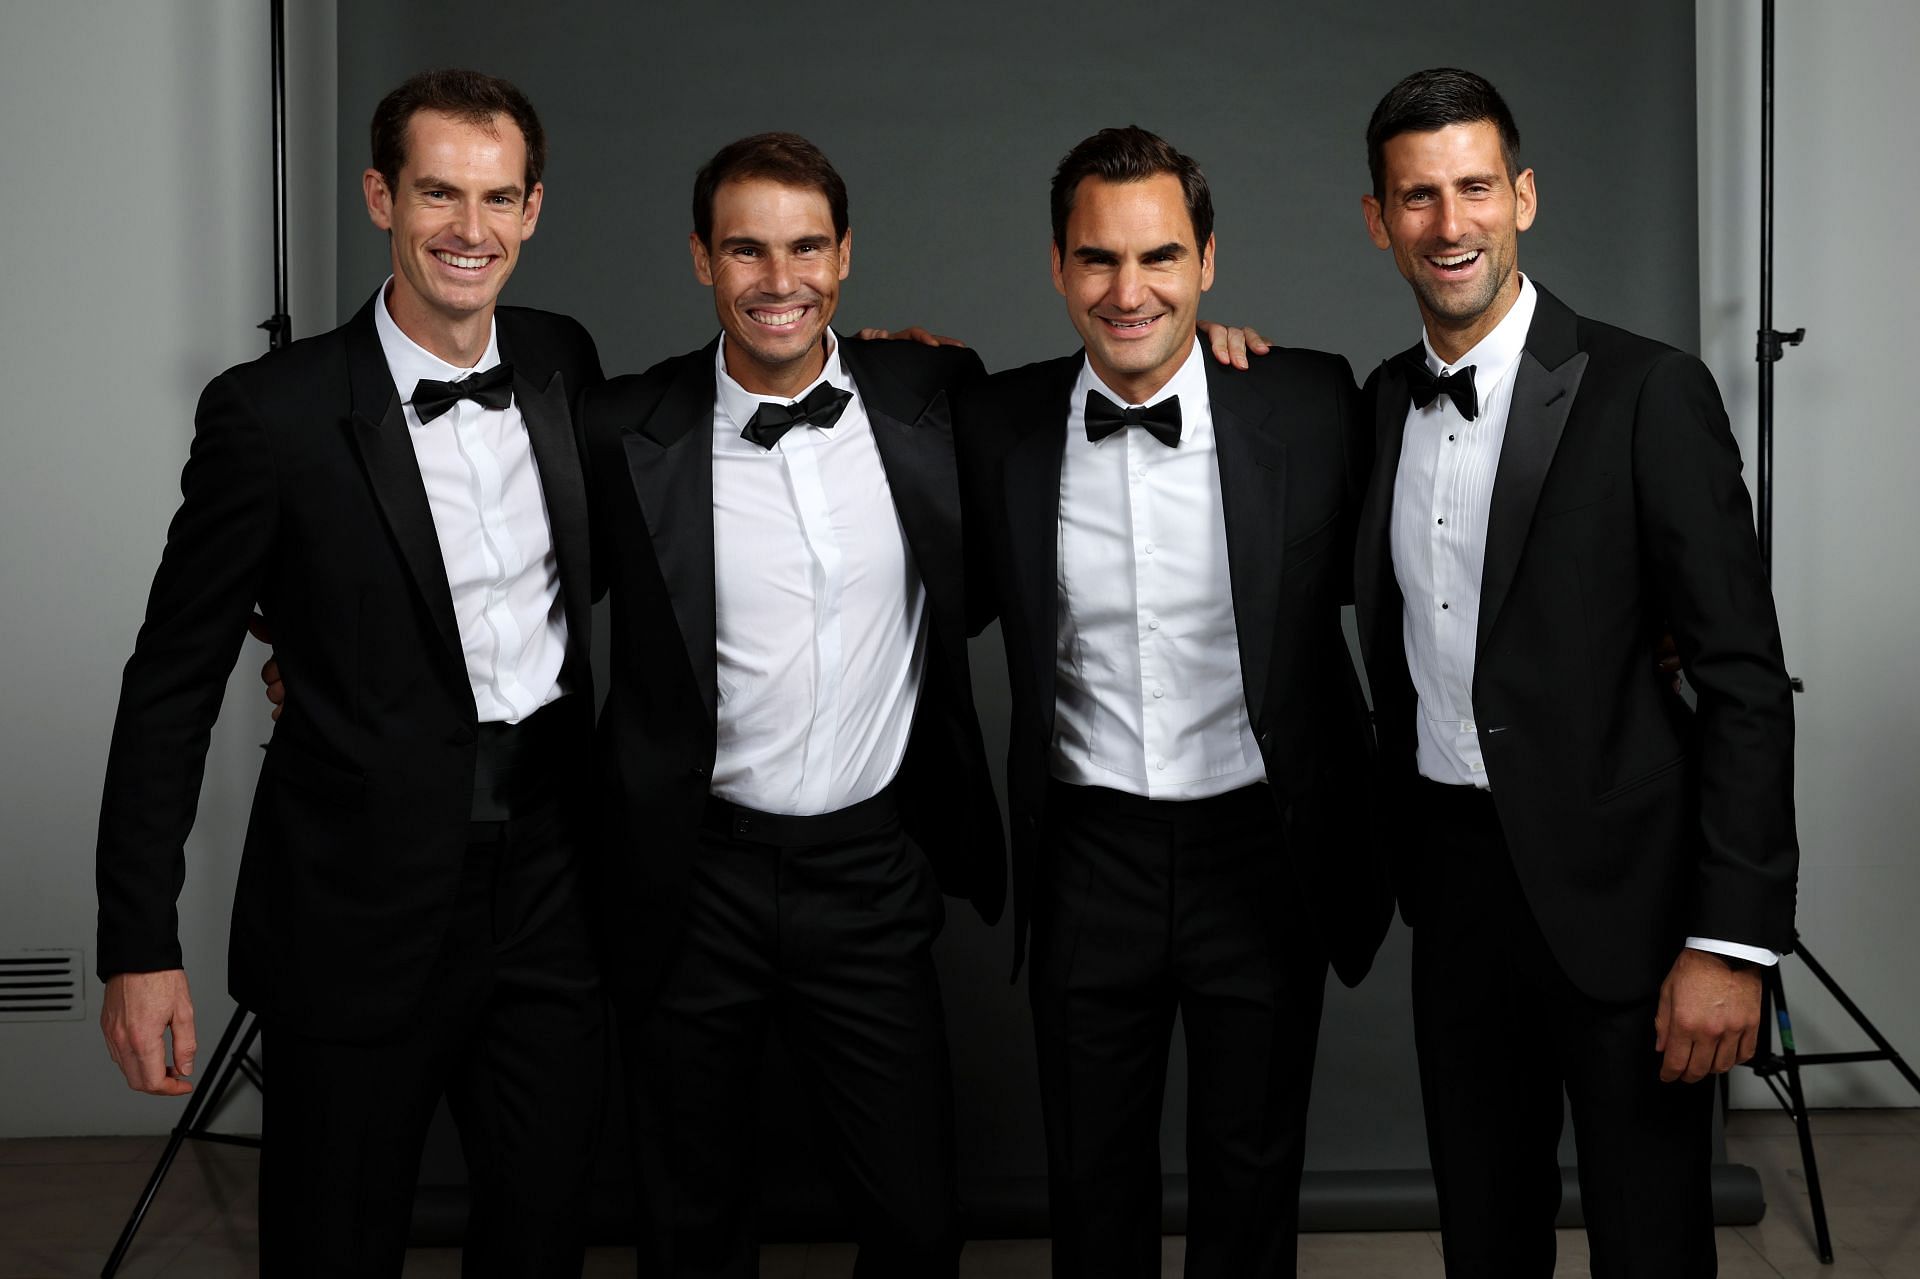 Nadal, Federer and Djokovic at the Laver Cup 2022